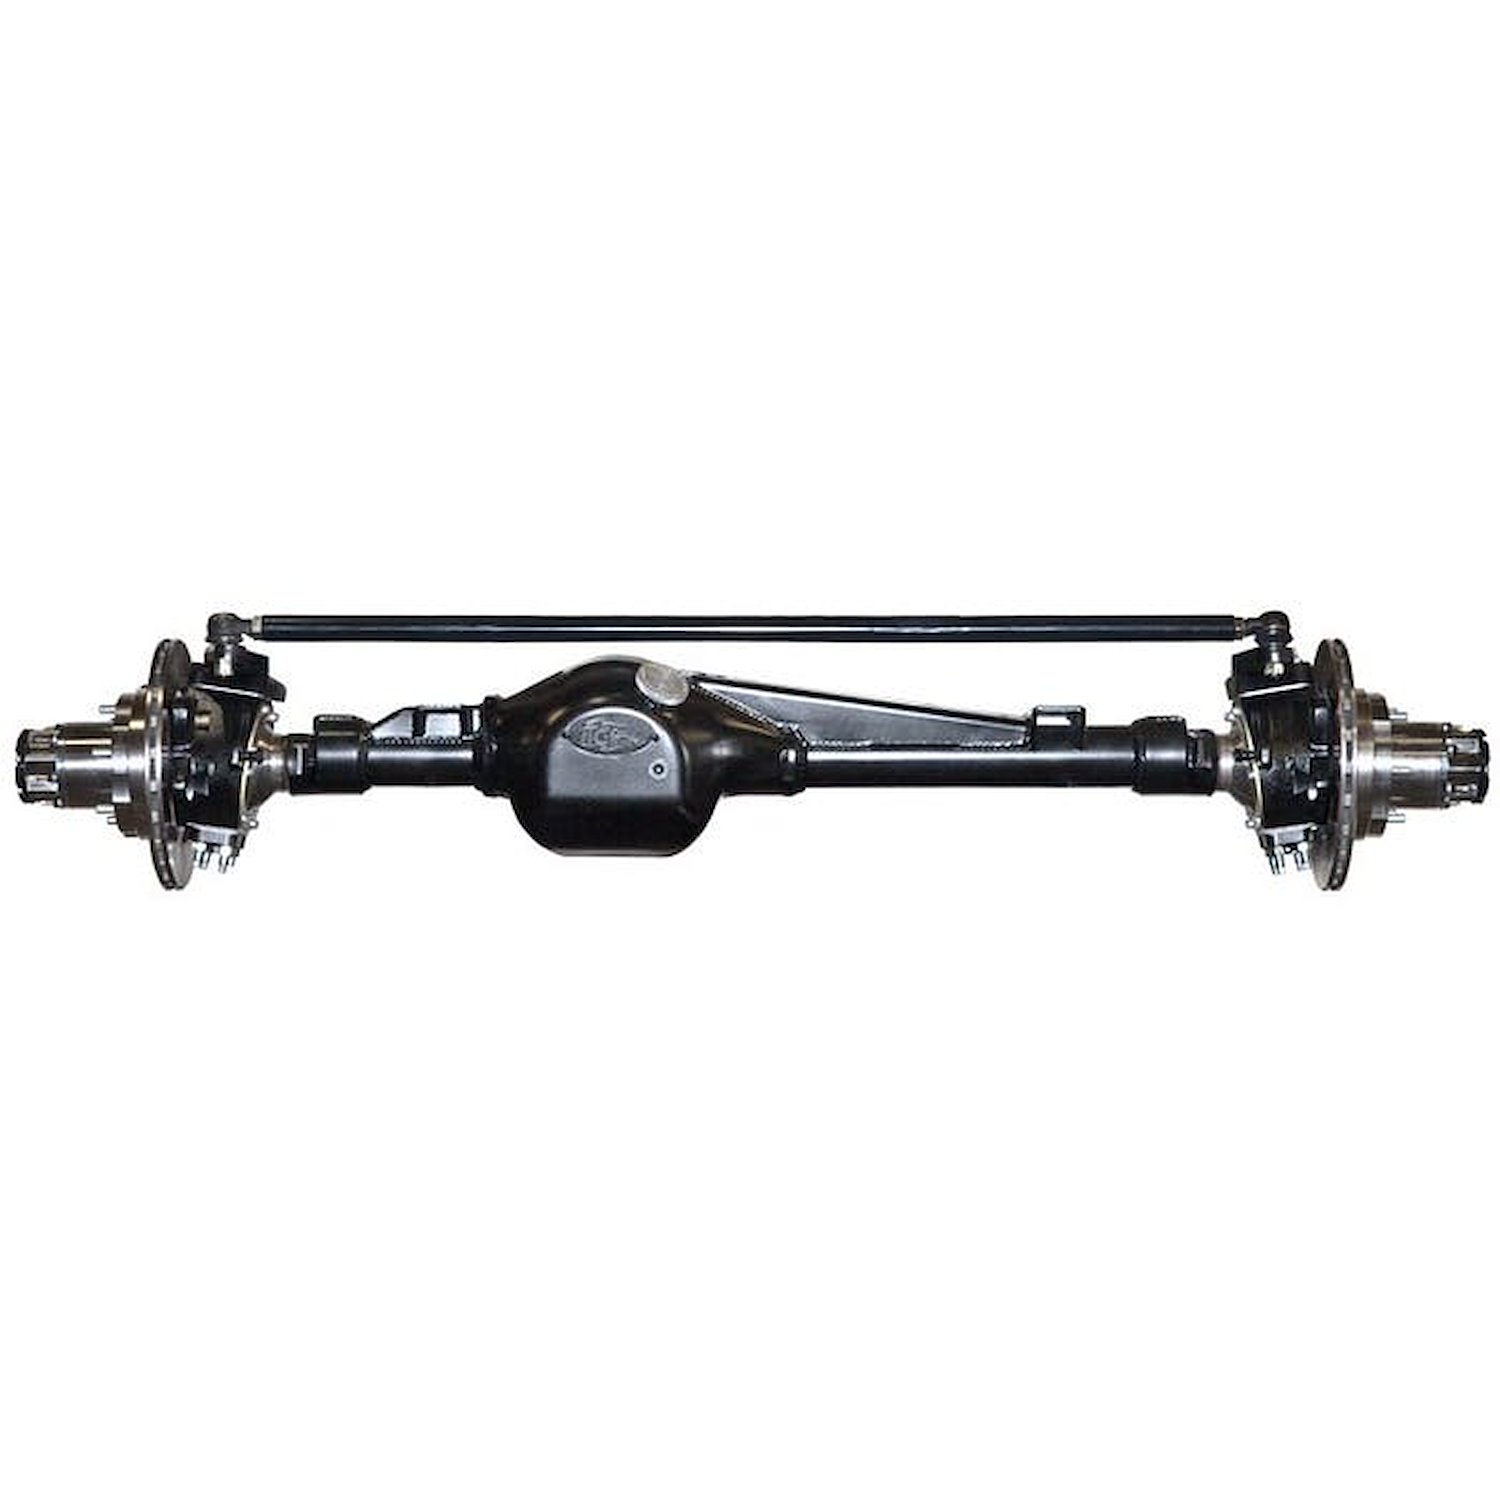 301605-1-KIT Rock Assault Fully-Built Front Axles, +3 Width, RHD, V6, 5.29, Grizzly, Locking Hubs, Toyota